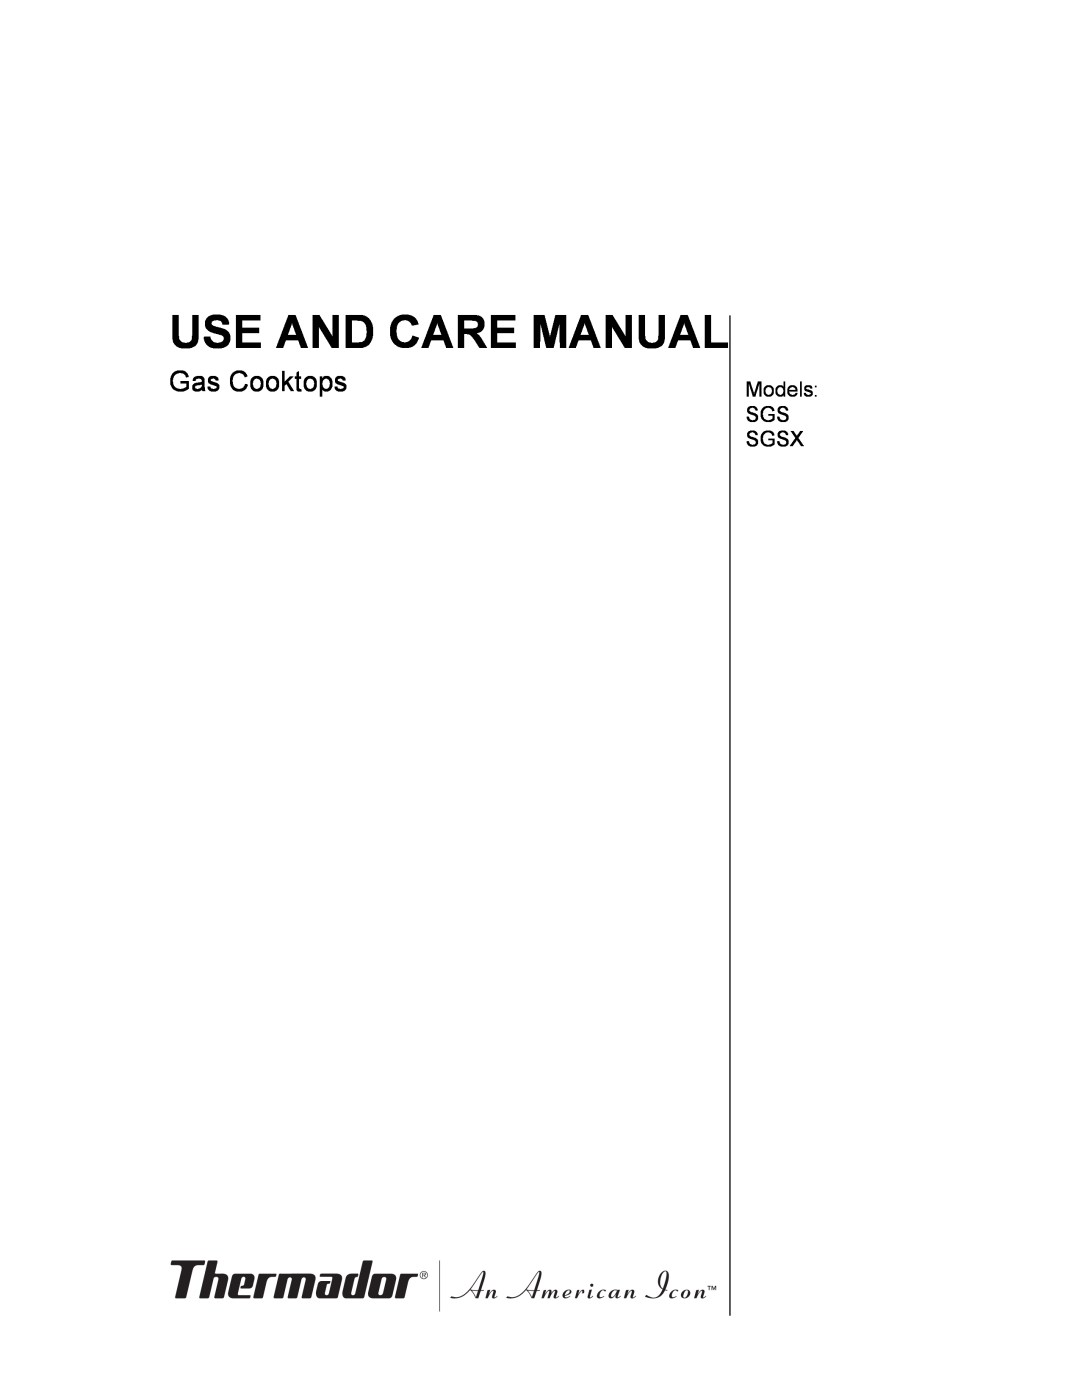 Bosch Appliances SGSX manual Use And Care Manual, Gas Cooktops 